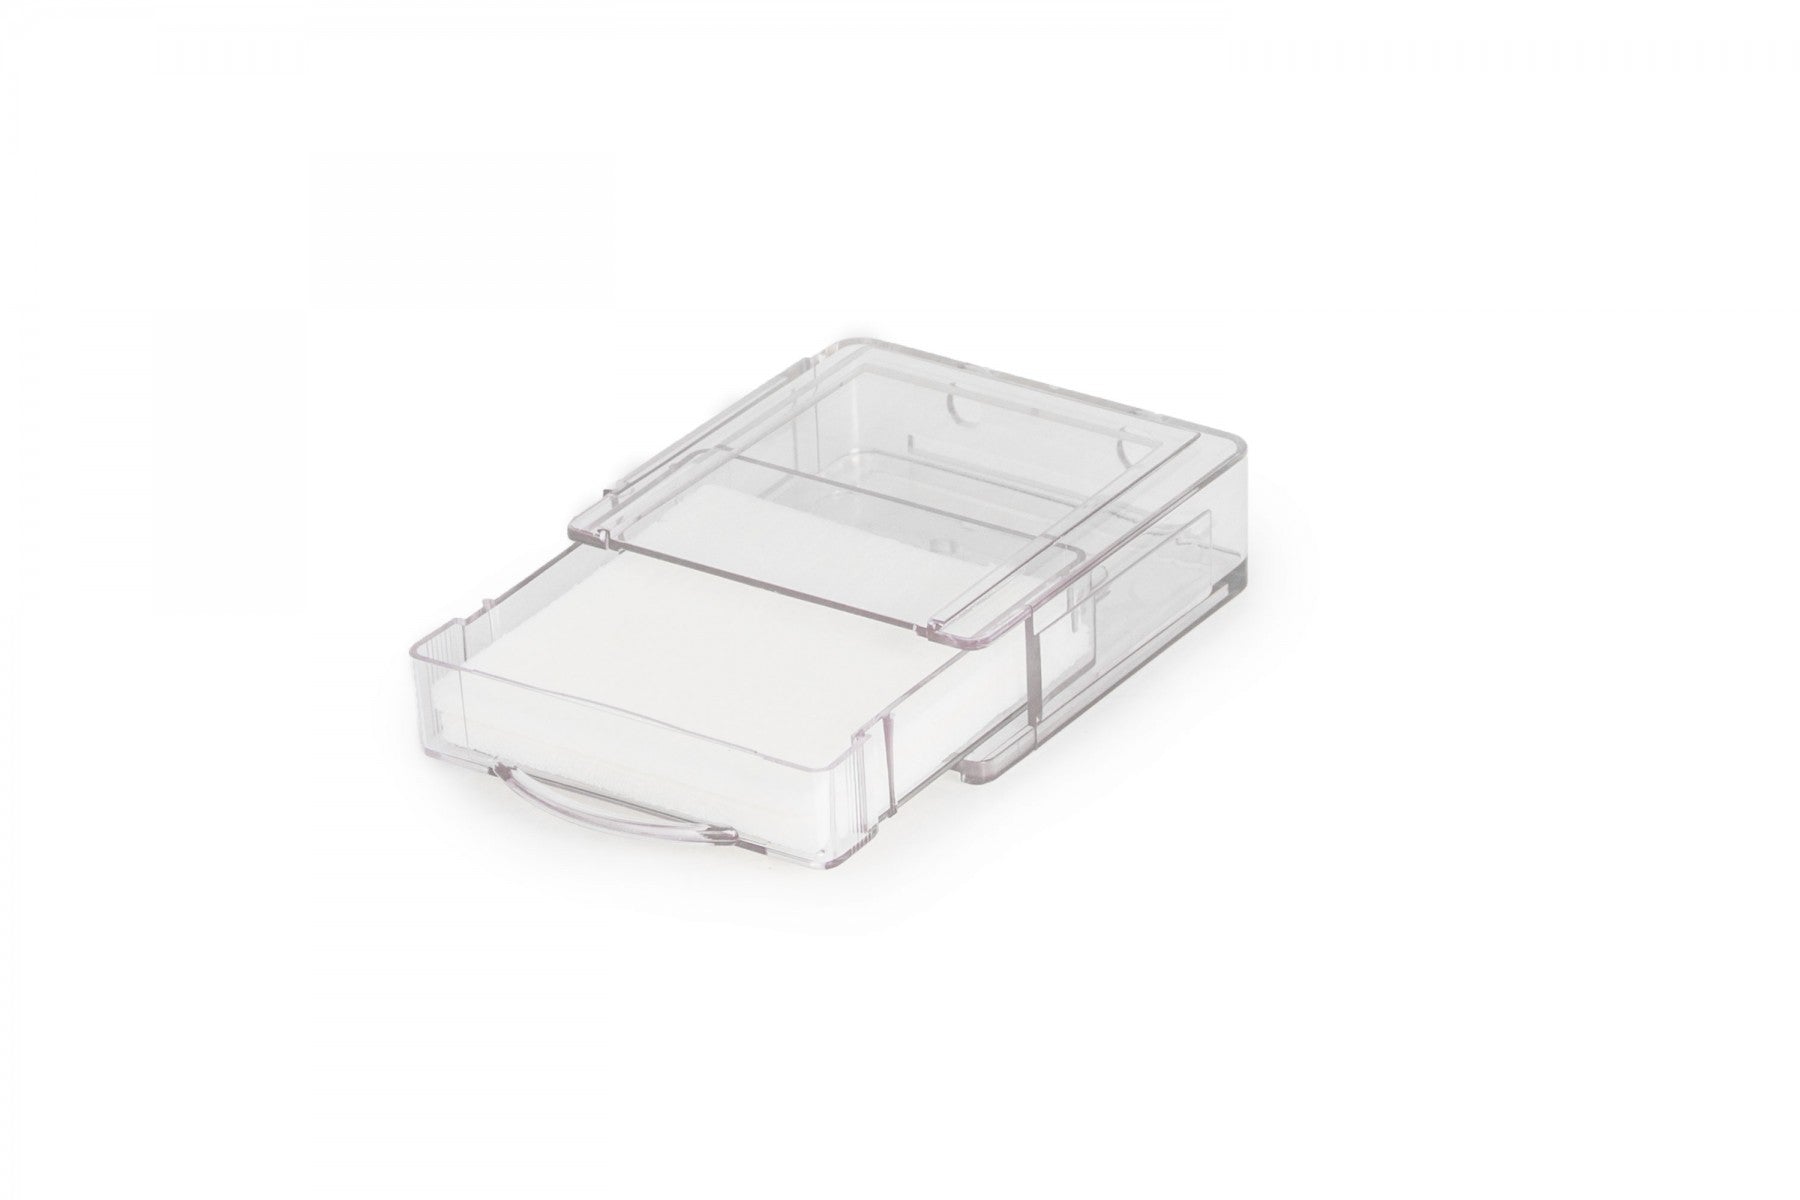 Baader Planetarium Accessory Baader Stackable Empty Filter Box - 2459253